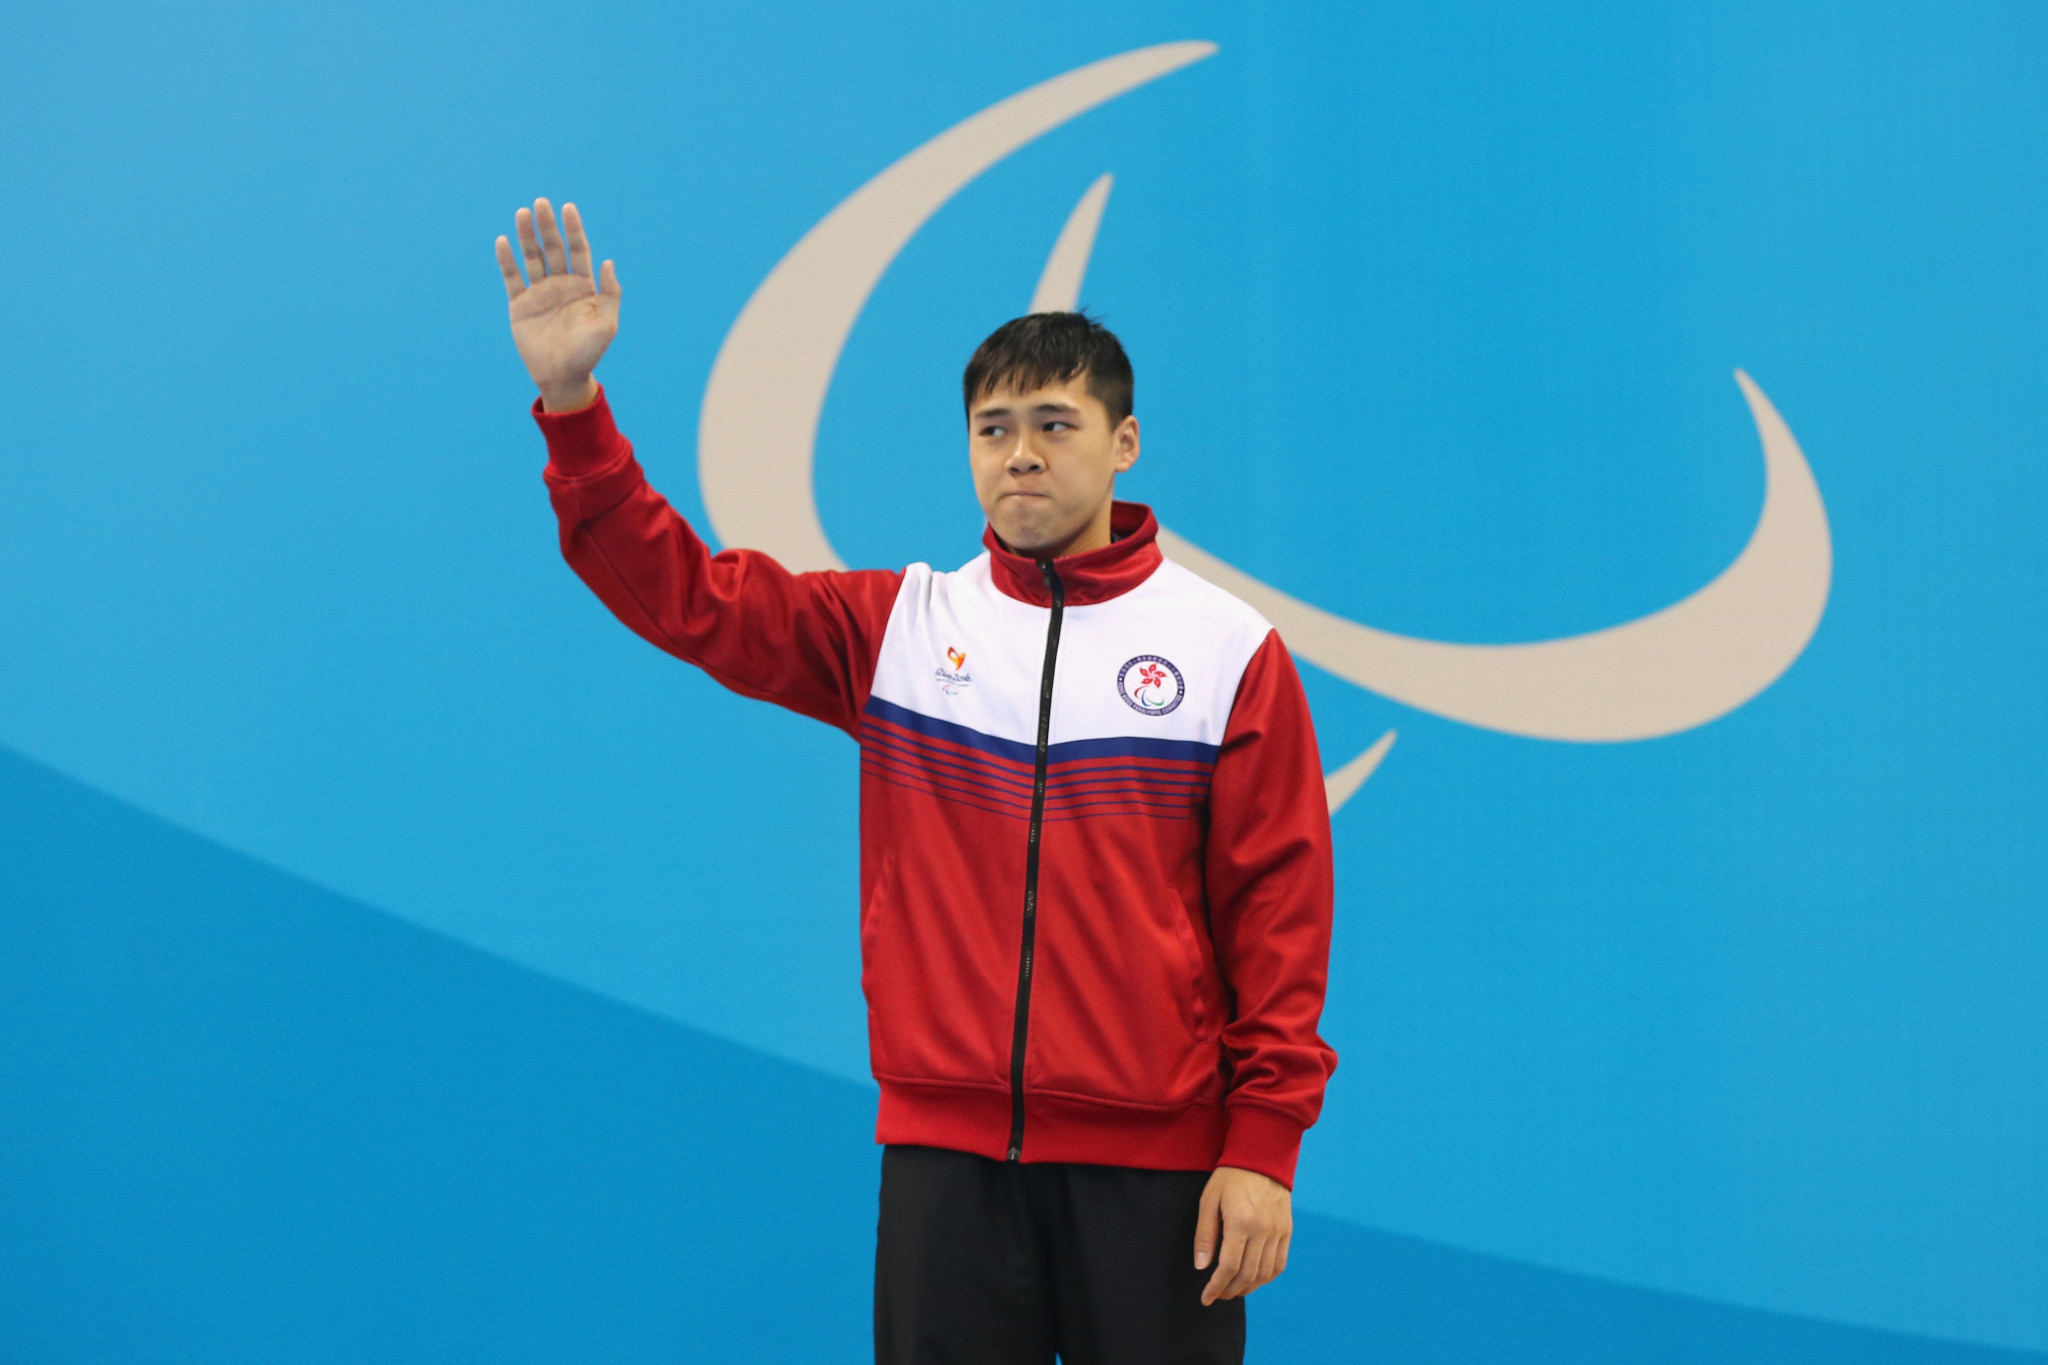 Home fans will be pinning their hopes on Tang Wai Lok, the reigning Paralympic champion in the men’s 200 metres freestyle S14 event ©Getty Images